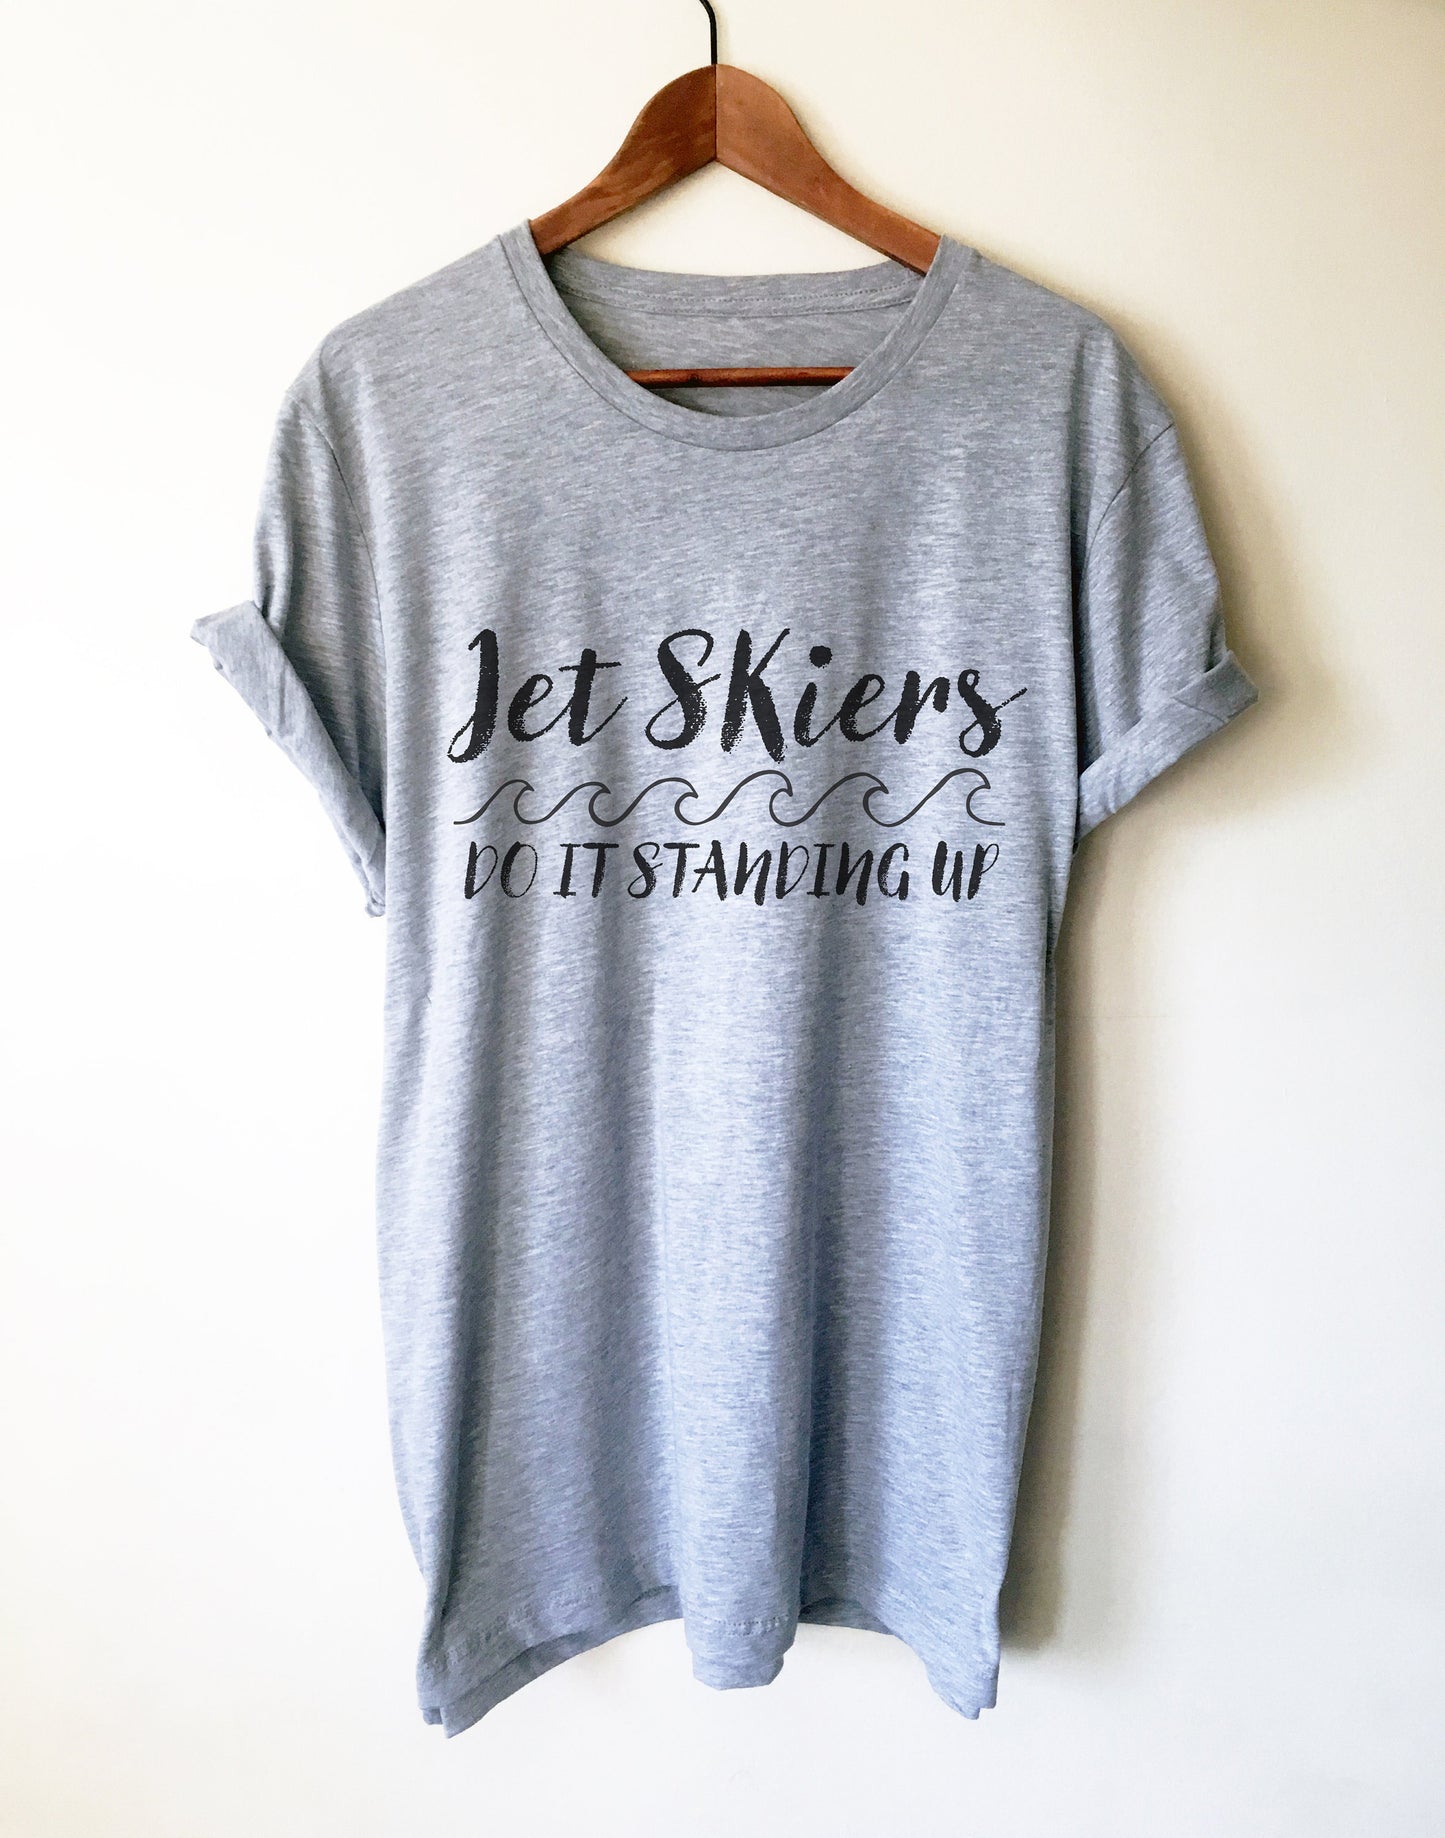 Jet Skiers Do It Standing Up Unisex